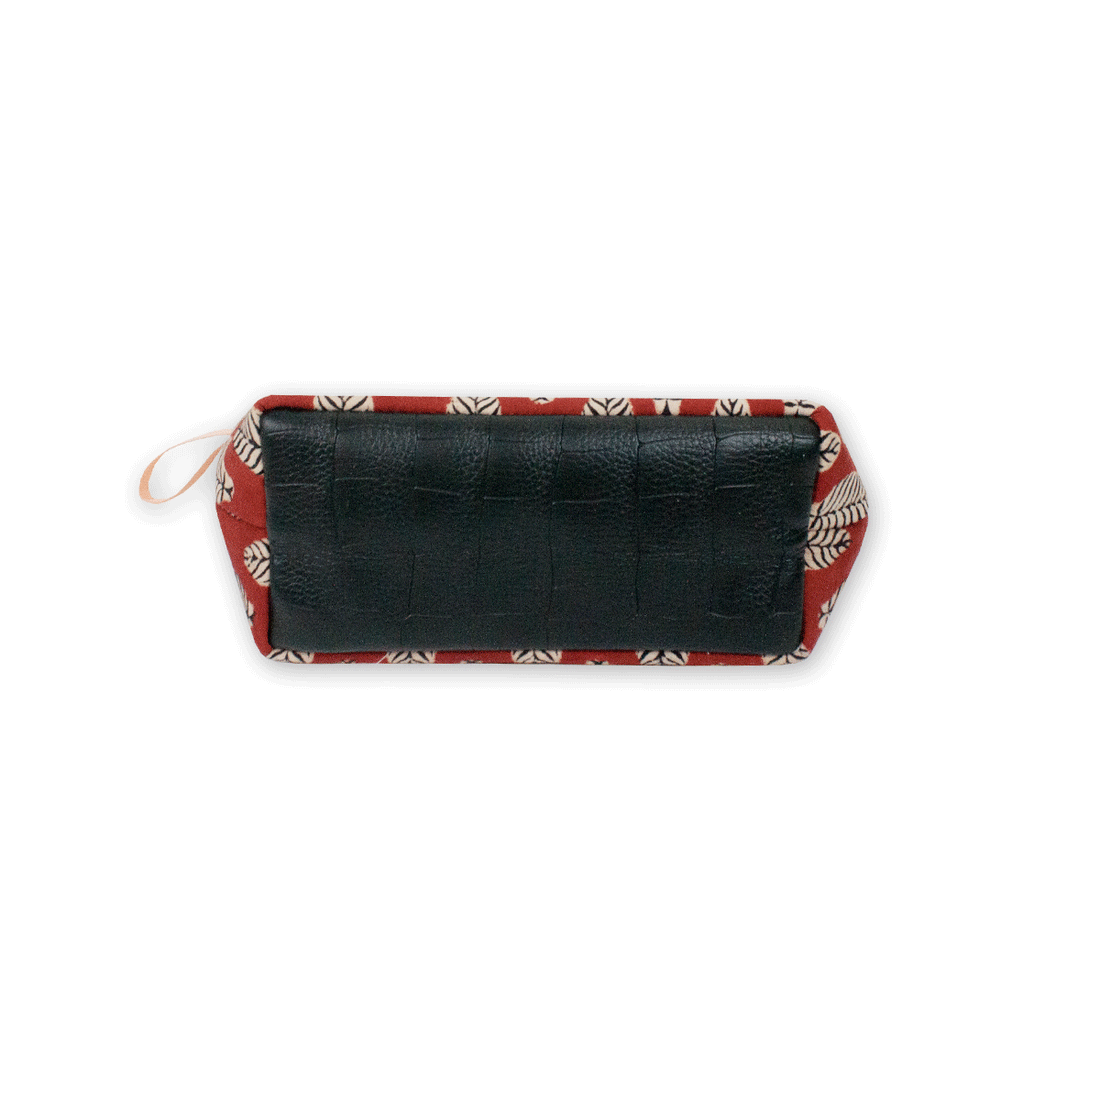 Red Leaves Block Printed Pouch